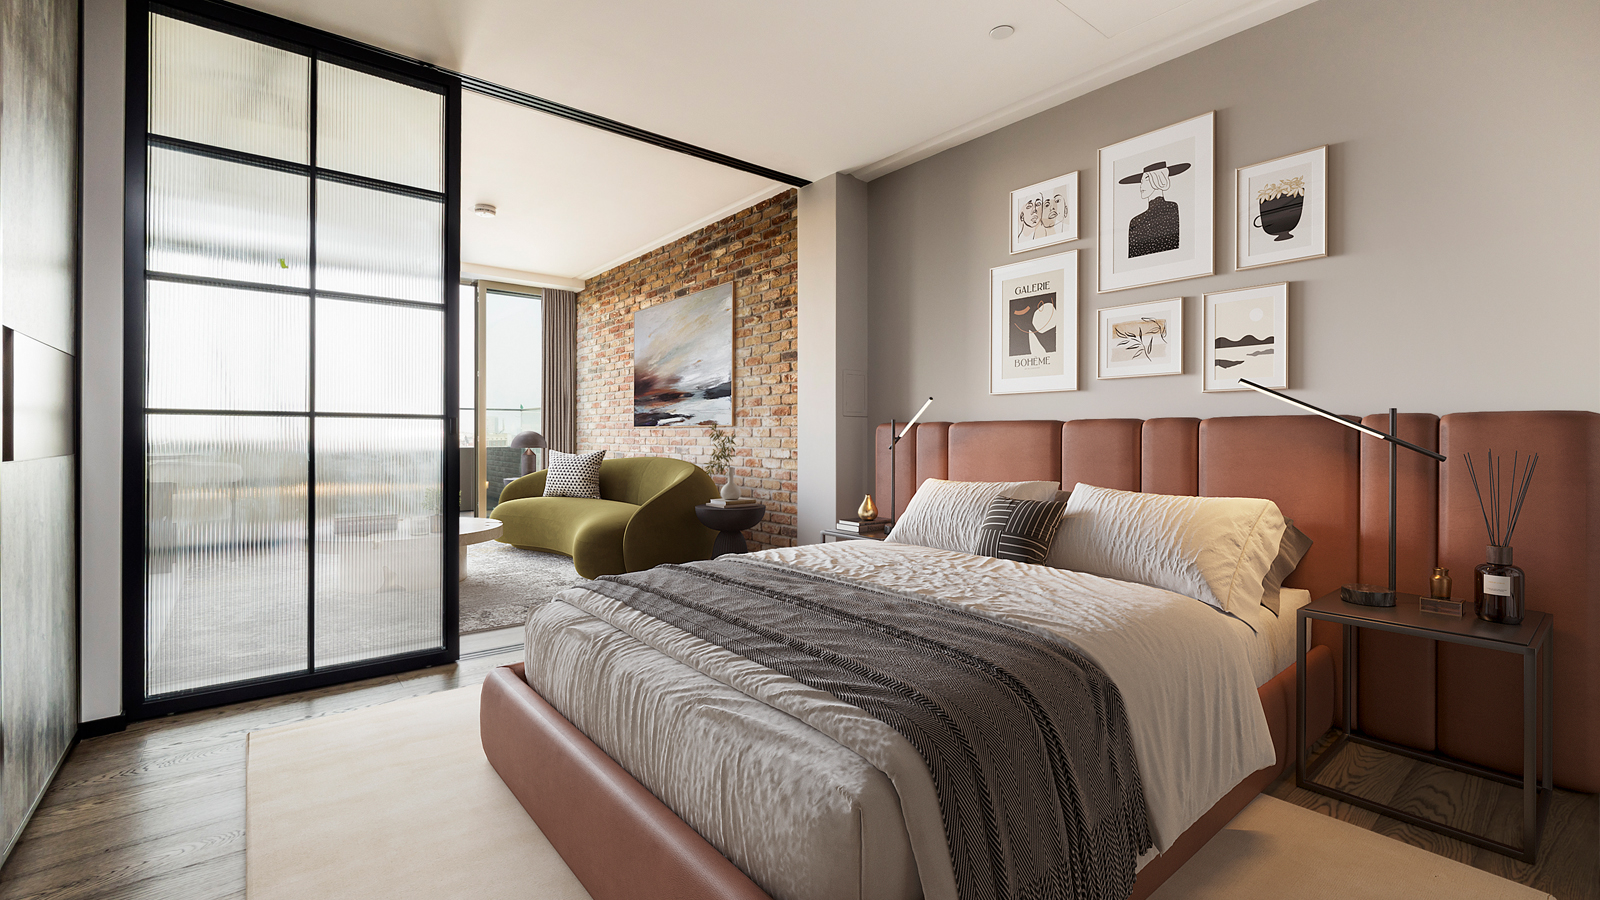 Bedroom and hallway at Apartment 810 The Stage, furniture superimposed for illustrative purposes only, ©Galliard Homes.